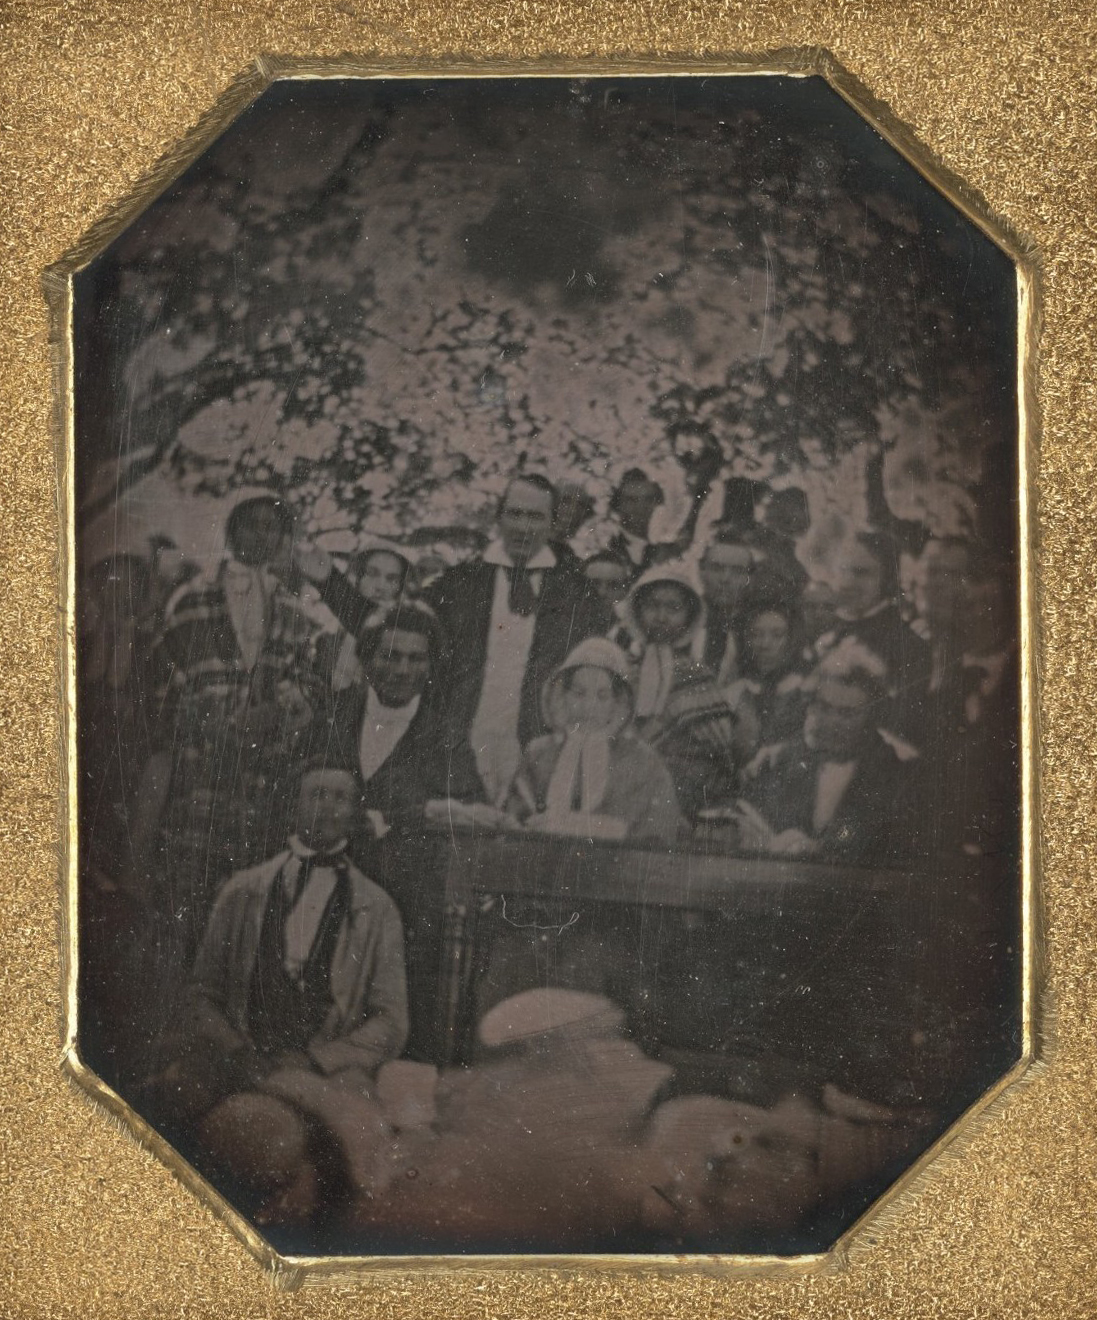 A grainy black and white photograph of a gathering of Black Americans all facing the camera with a gold border around the photograph